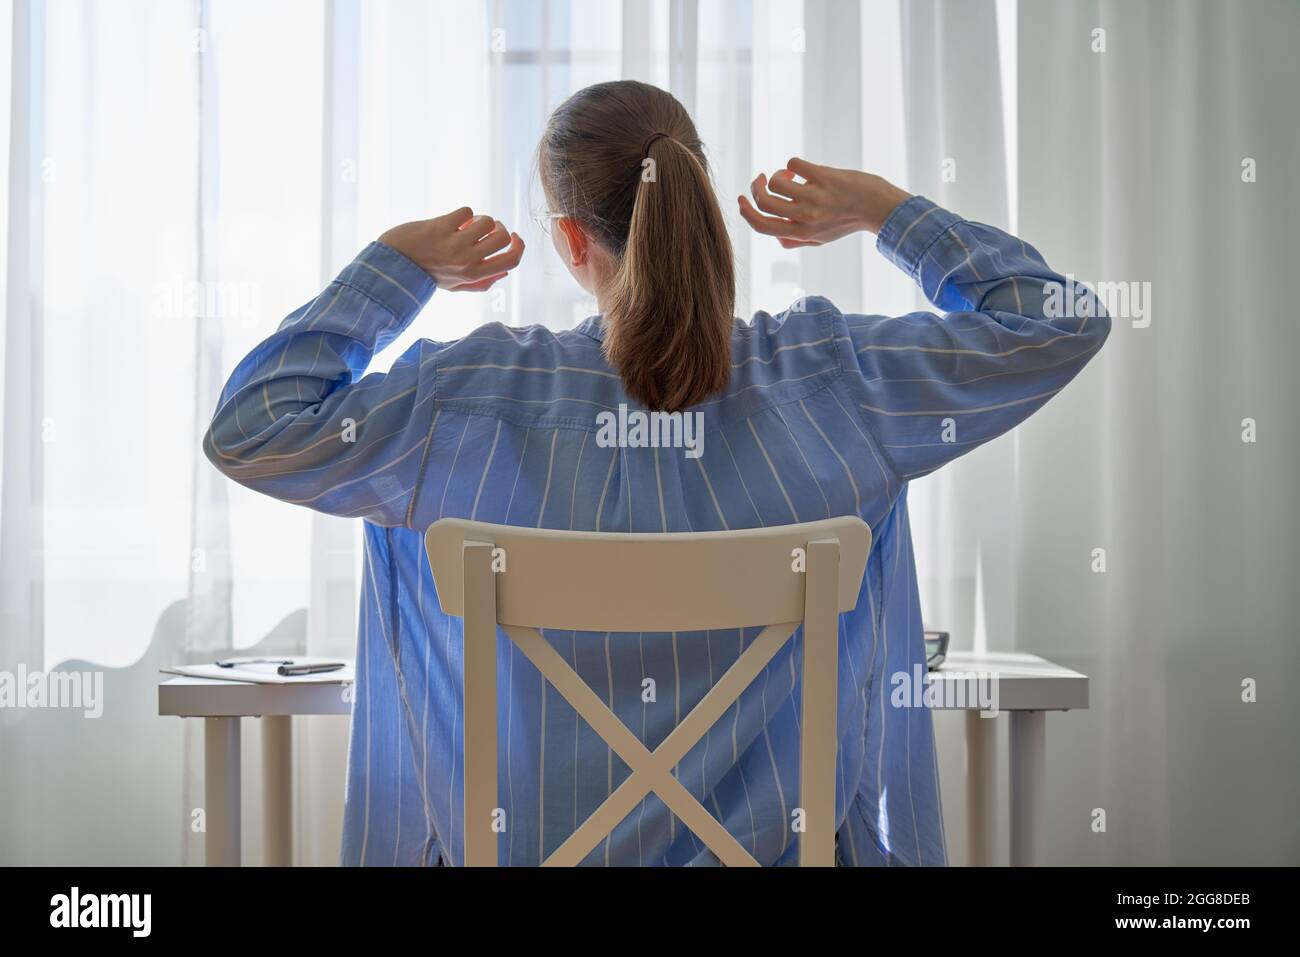 Unrecognizable woman stretching after long-hours working from home. Remote work difficulties Stock Photo